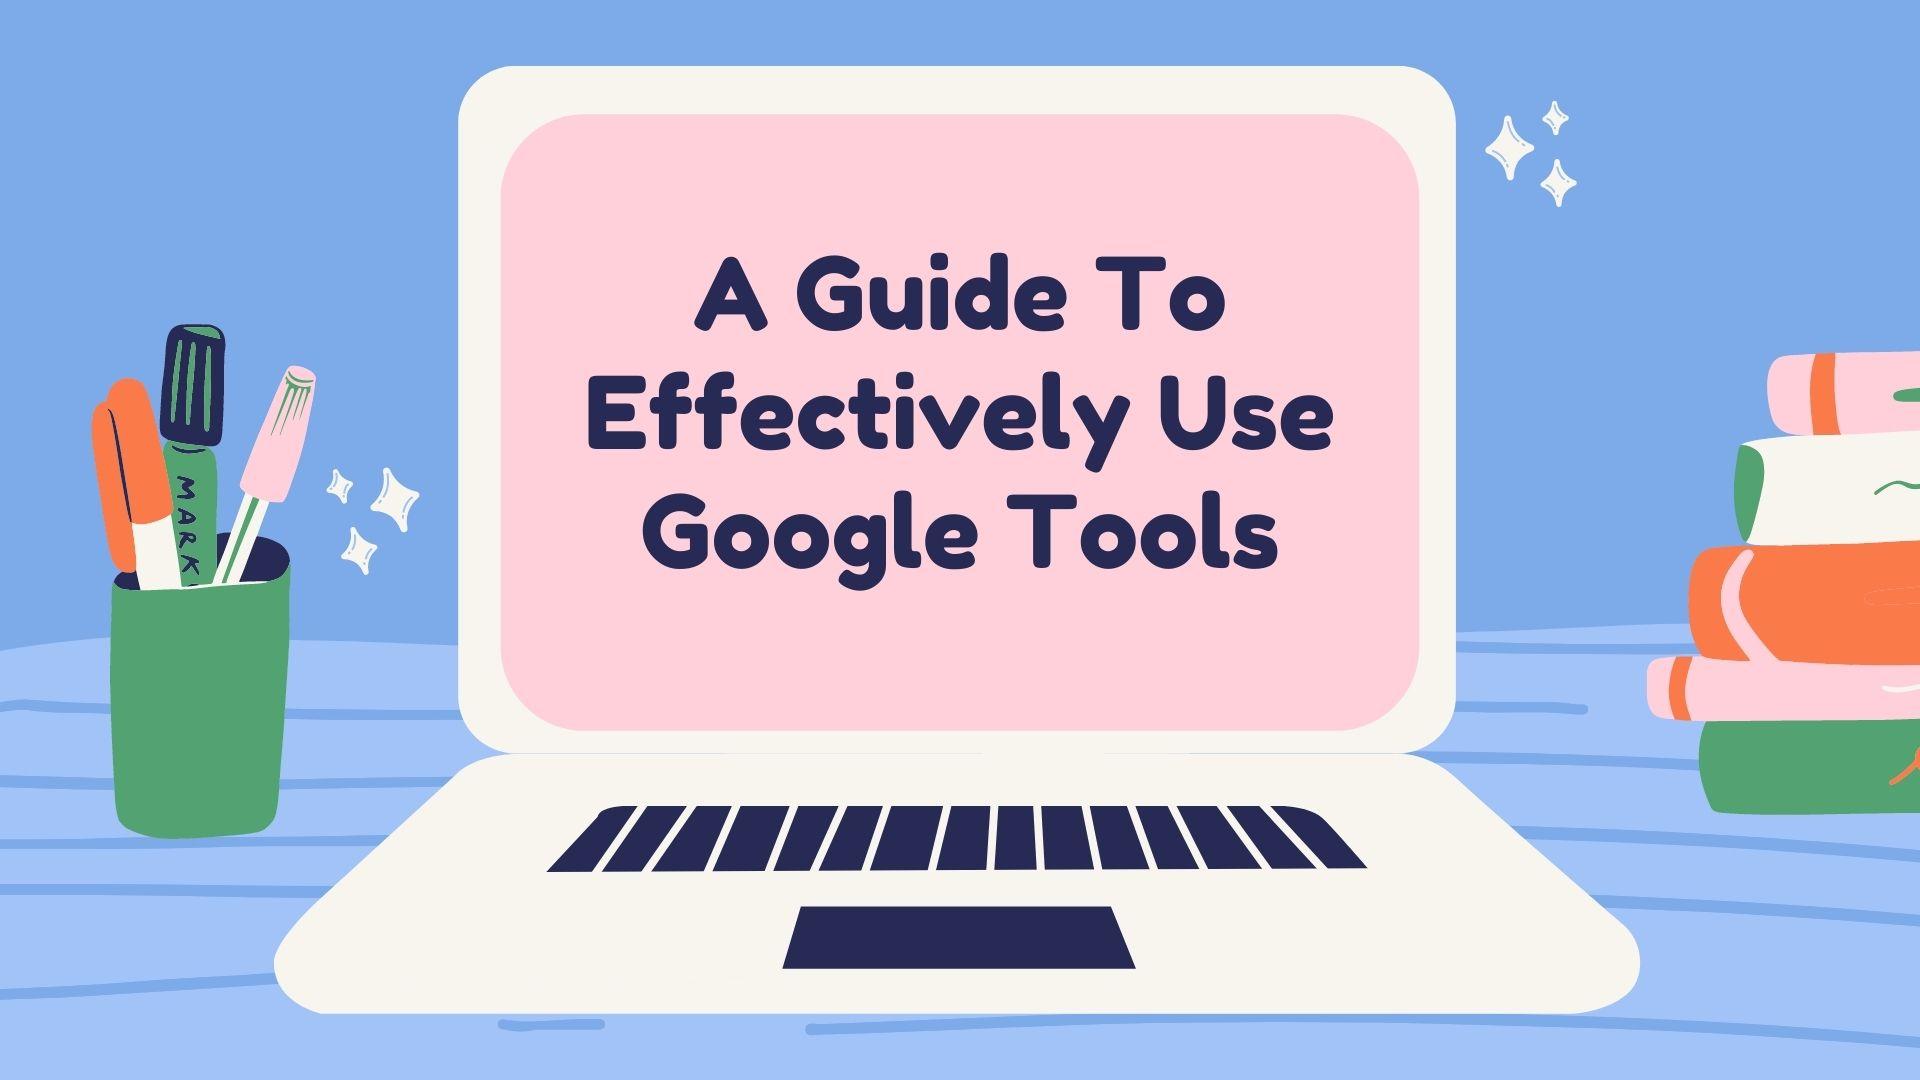 A Guide To Effectively Use Google Tools